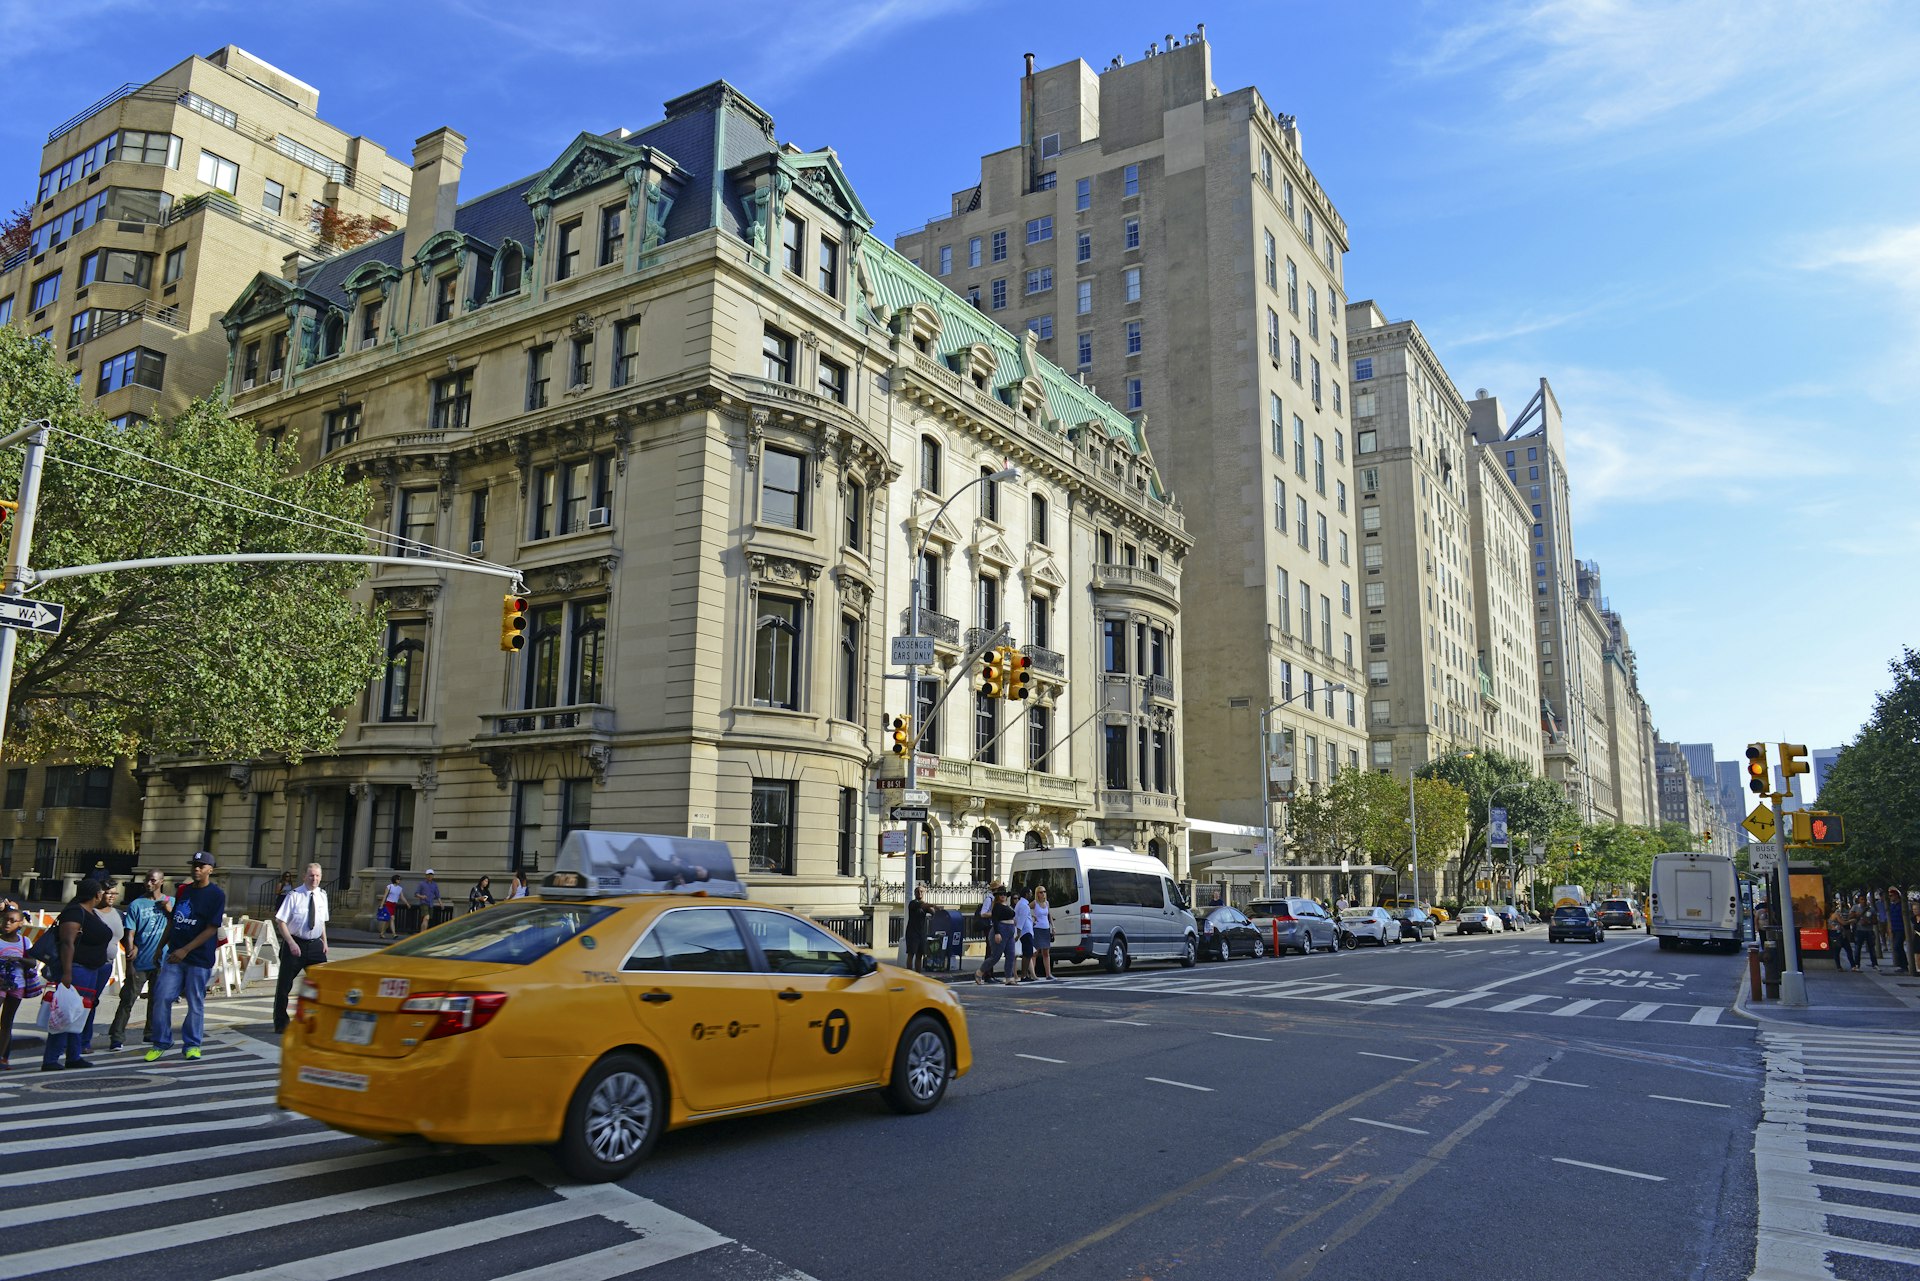 A yellow New York City cab drives past a luxury brick building on the Upper East Side